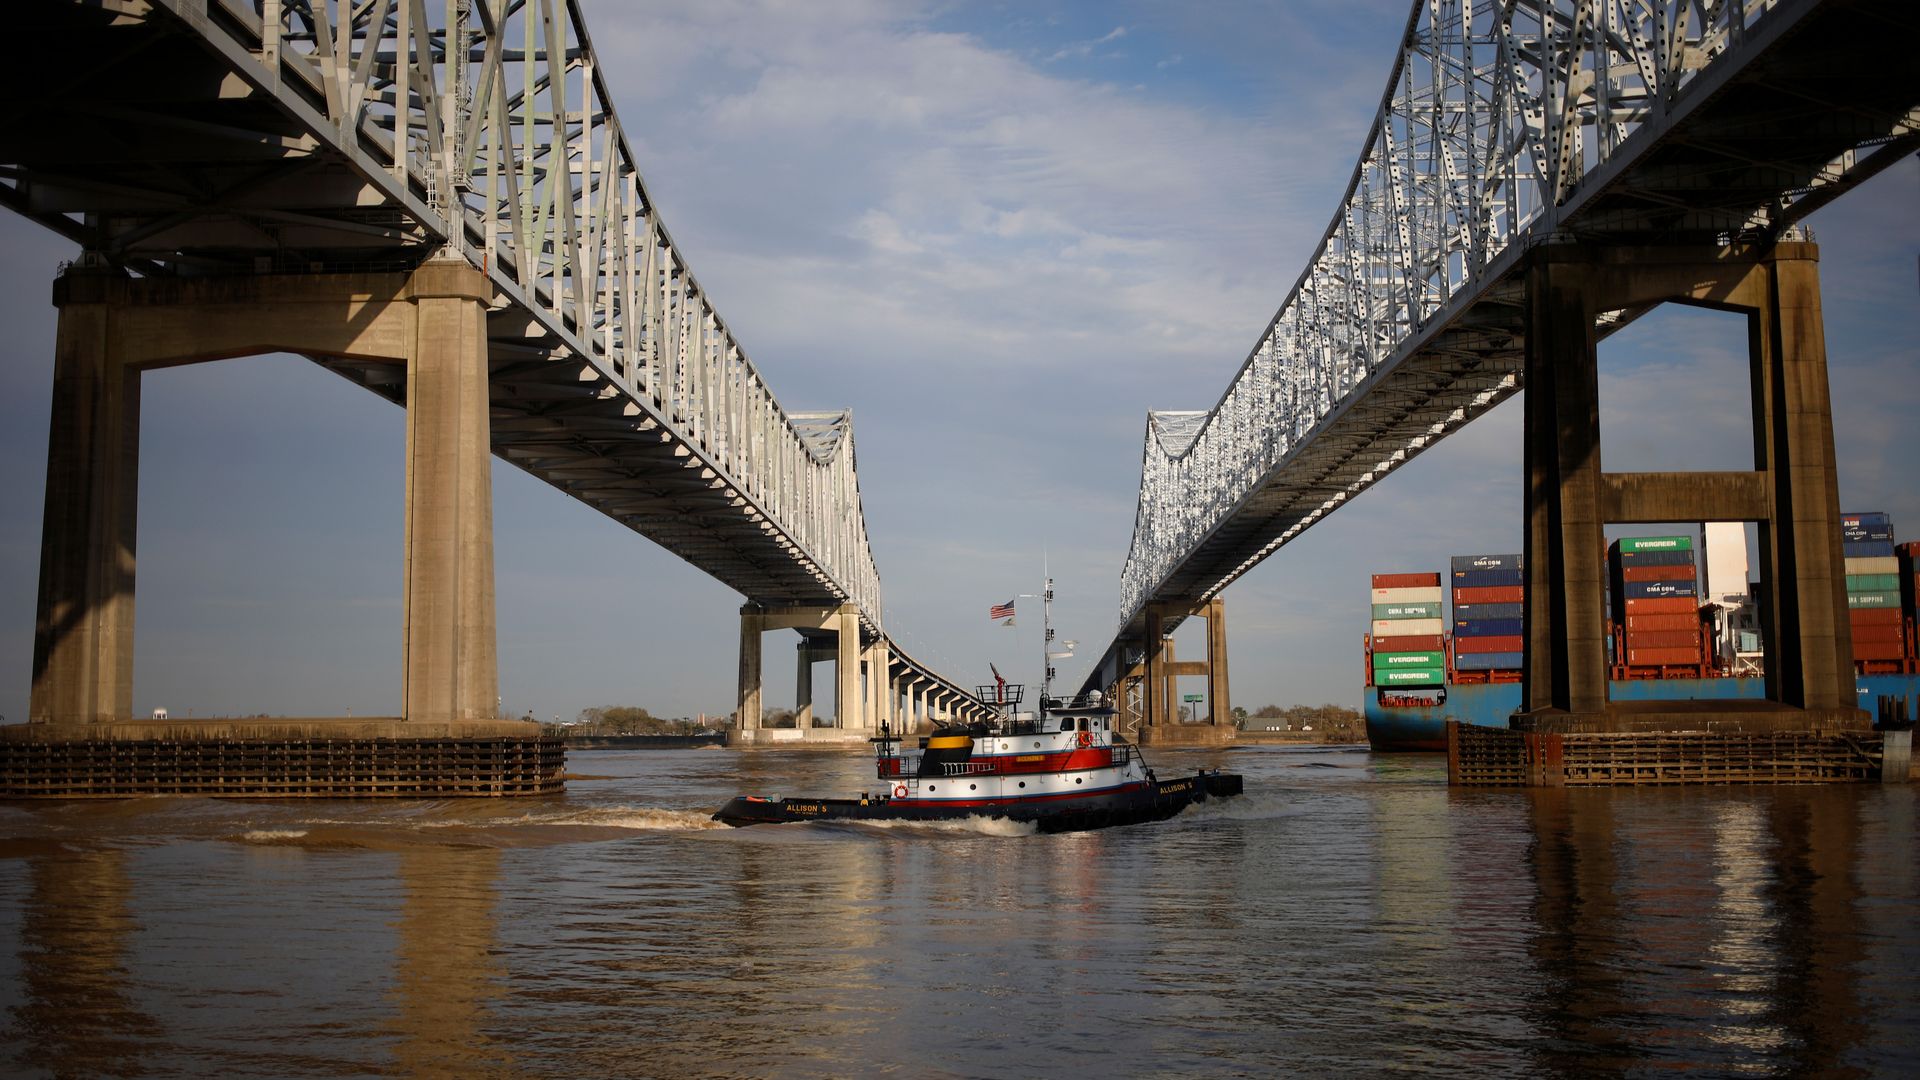 The photo shows a tugboat in the Mississippi River